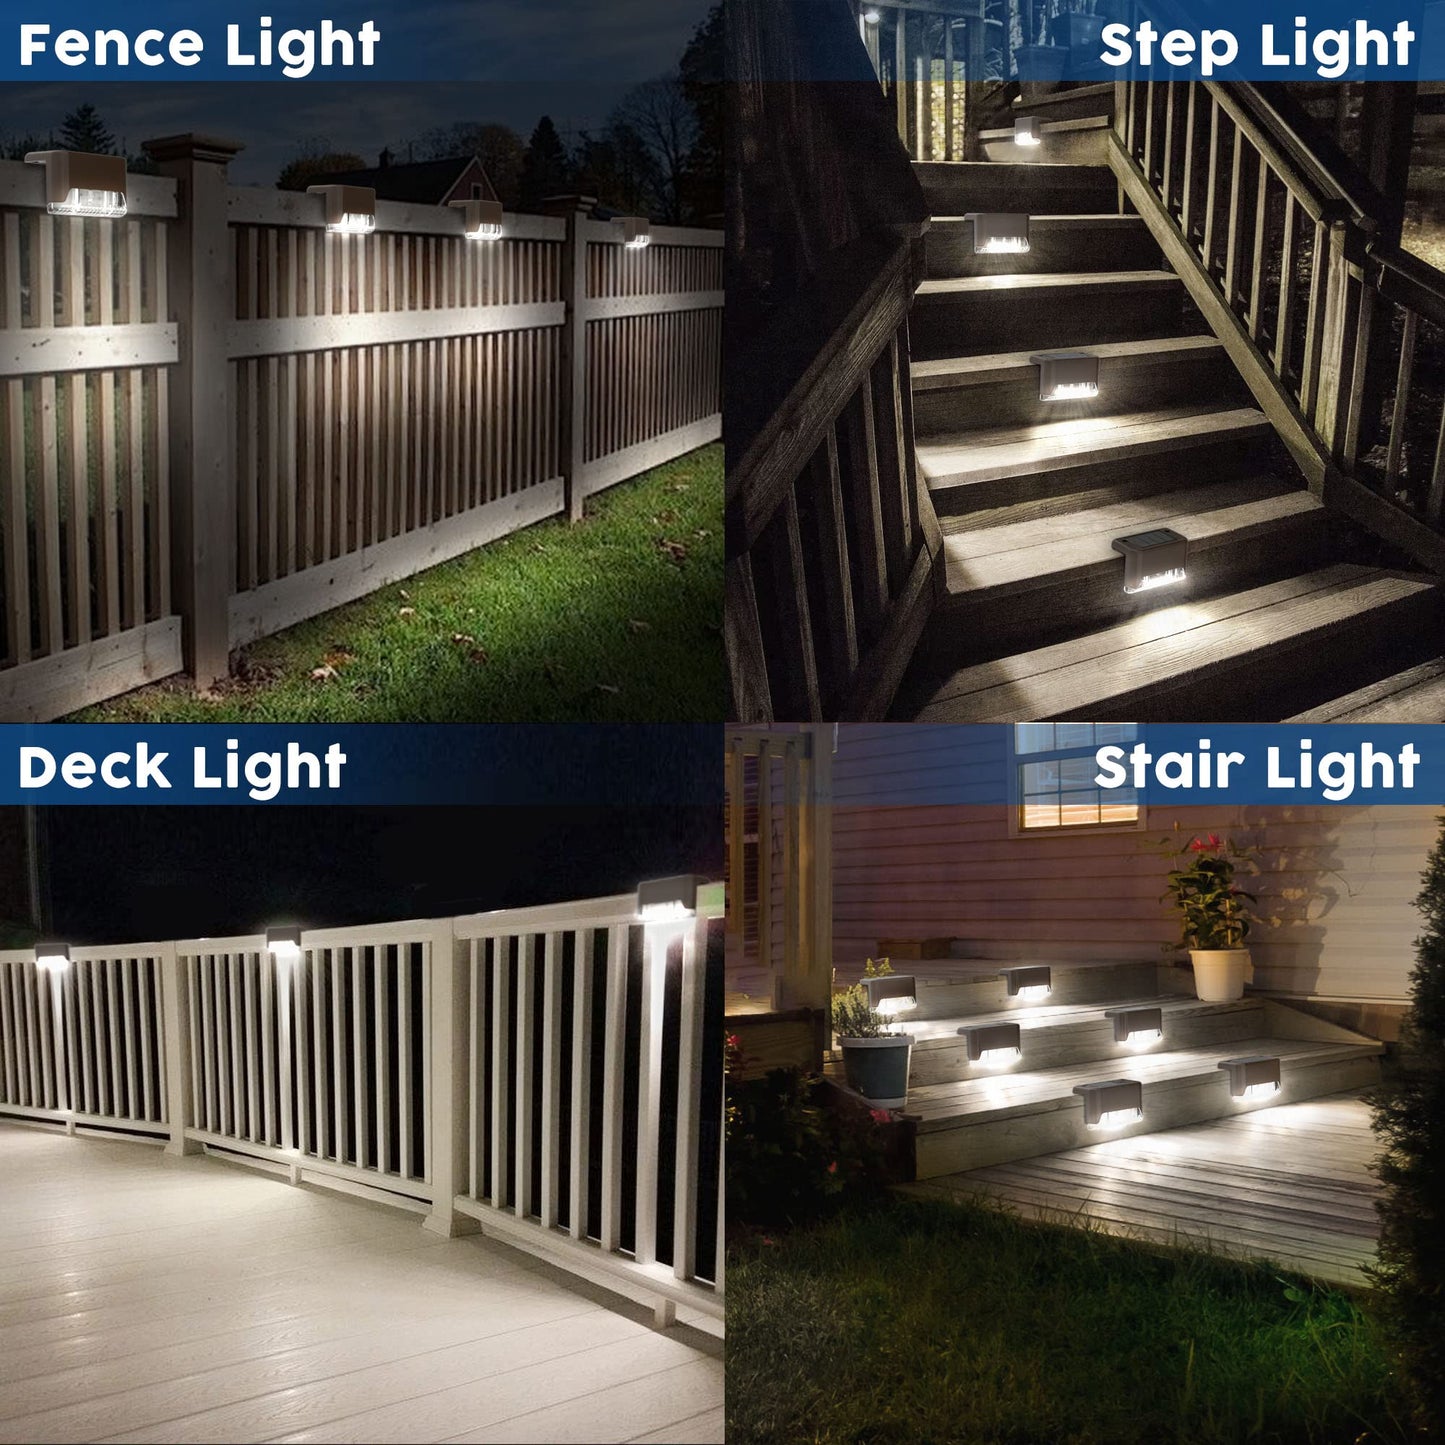 Otdair Solar Deck Lights, 16 Solar Step Lights Waterproof LED Solar Stair Lights, Outdoor Solar Fence Lights for Deck, Stairs, Step, Yard, Patio, and Pathway (Cold White)